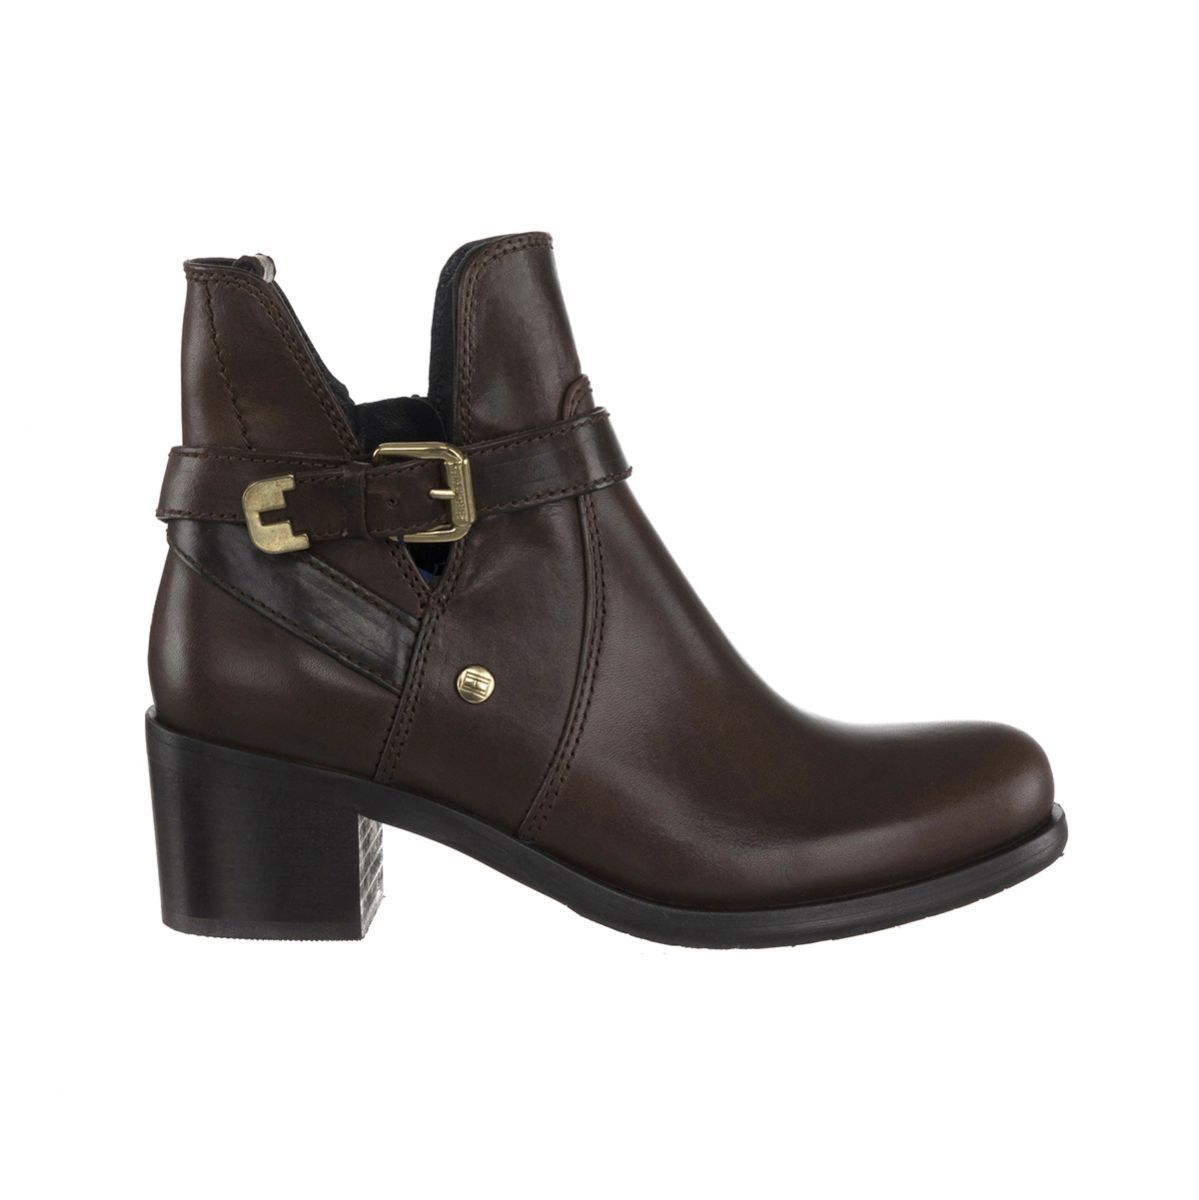 Tommy Hilfiger FW56819362-920-37 Ankle Boots